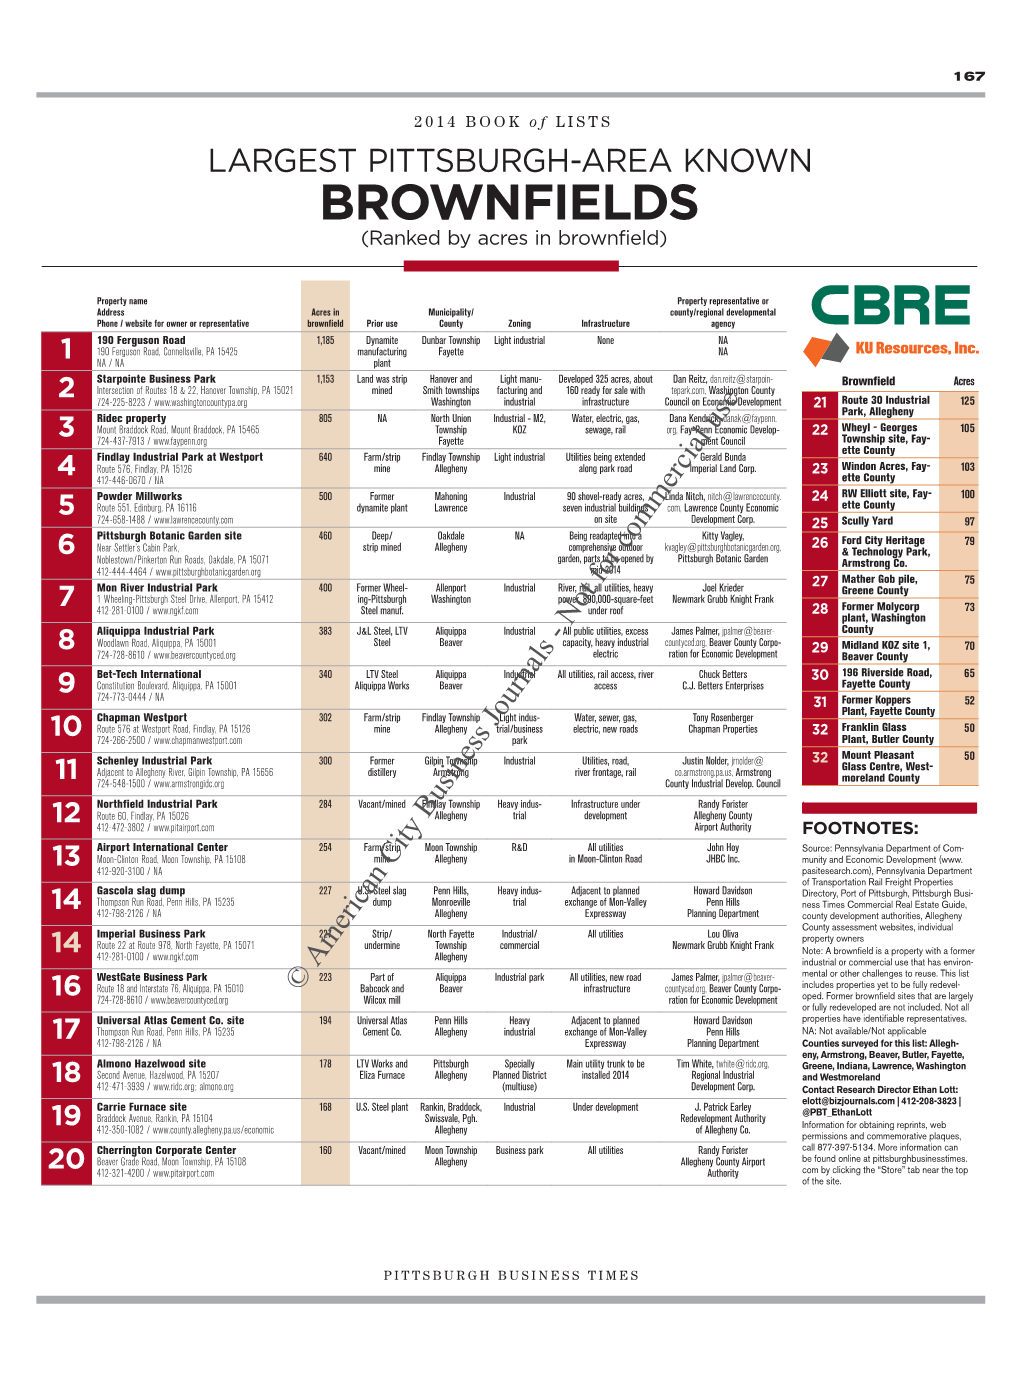 BROWNFIELDS (Ranked by Acres in Brownfield)